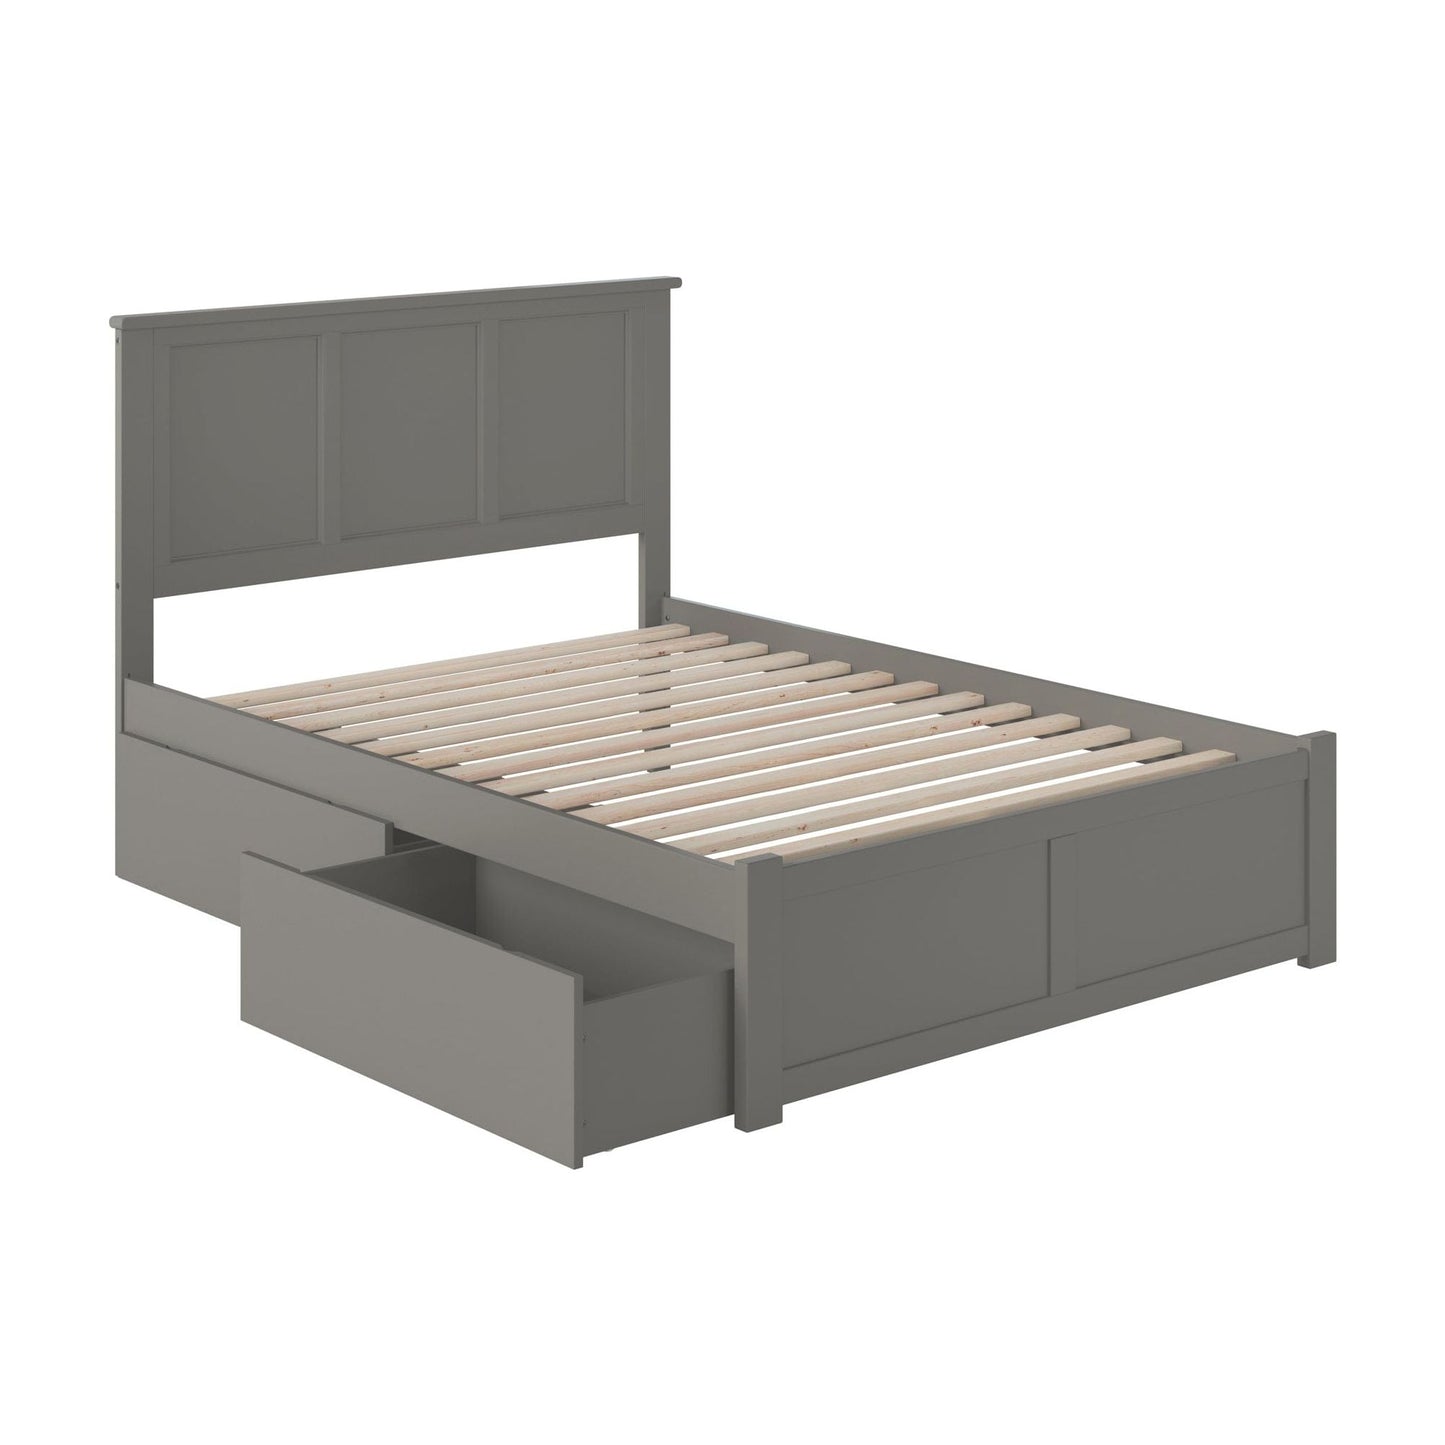 AFI Furnishings Madison Full Platform Bed with Flat Panel Foot Board and 2 Urban Bed Drawers Grey AR8632119